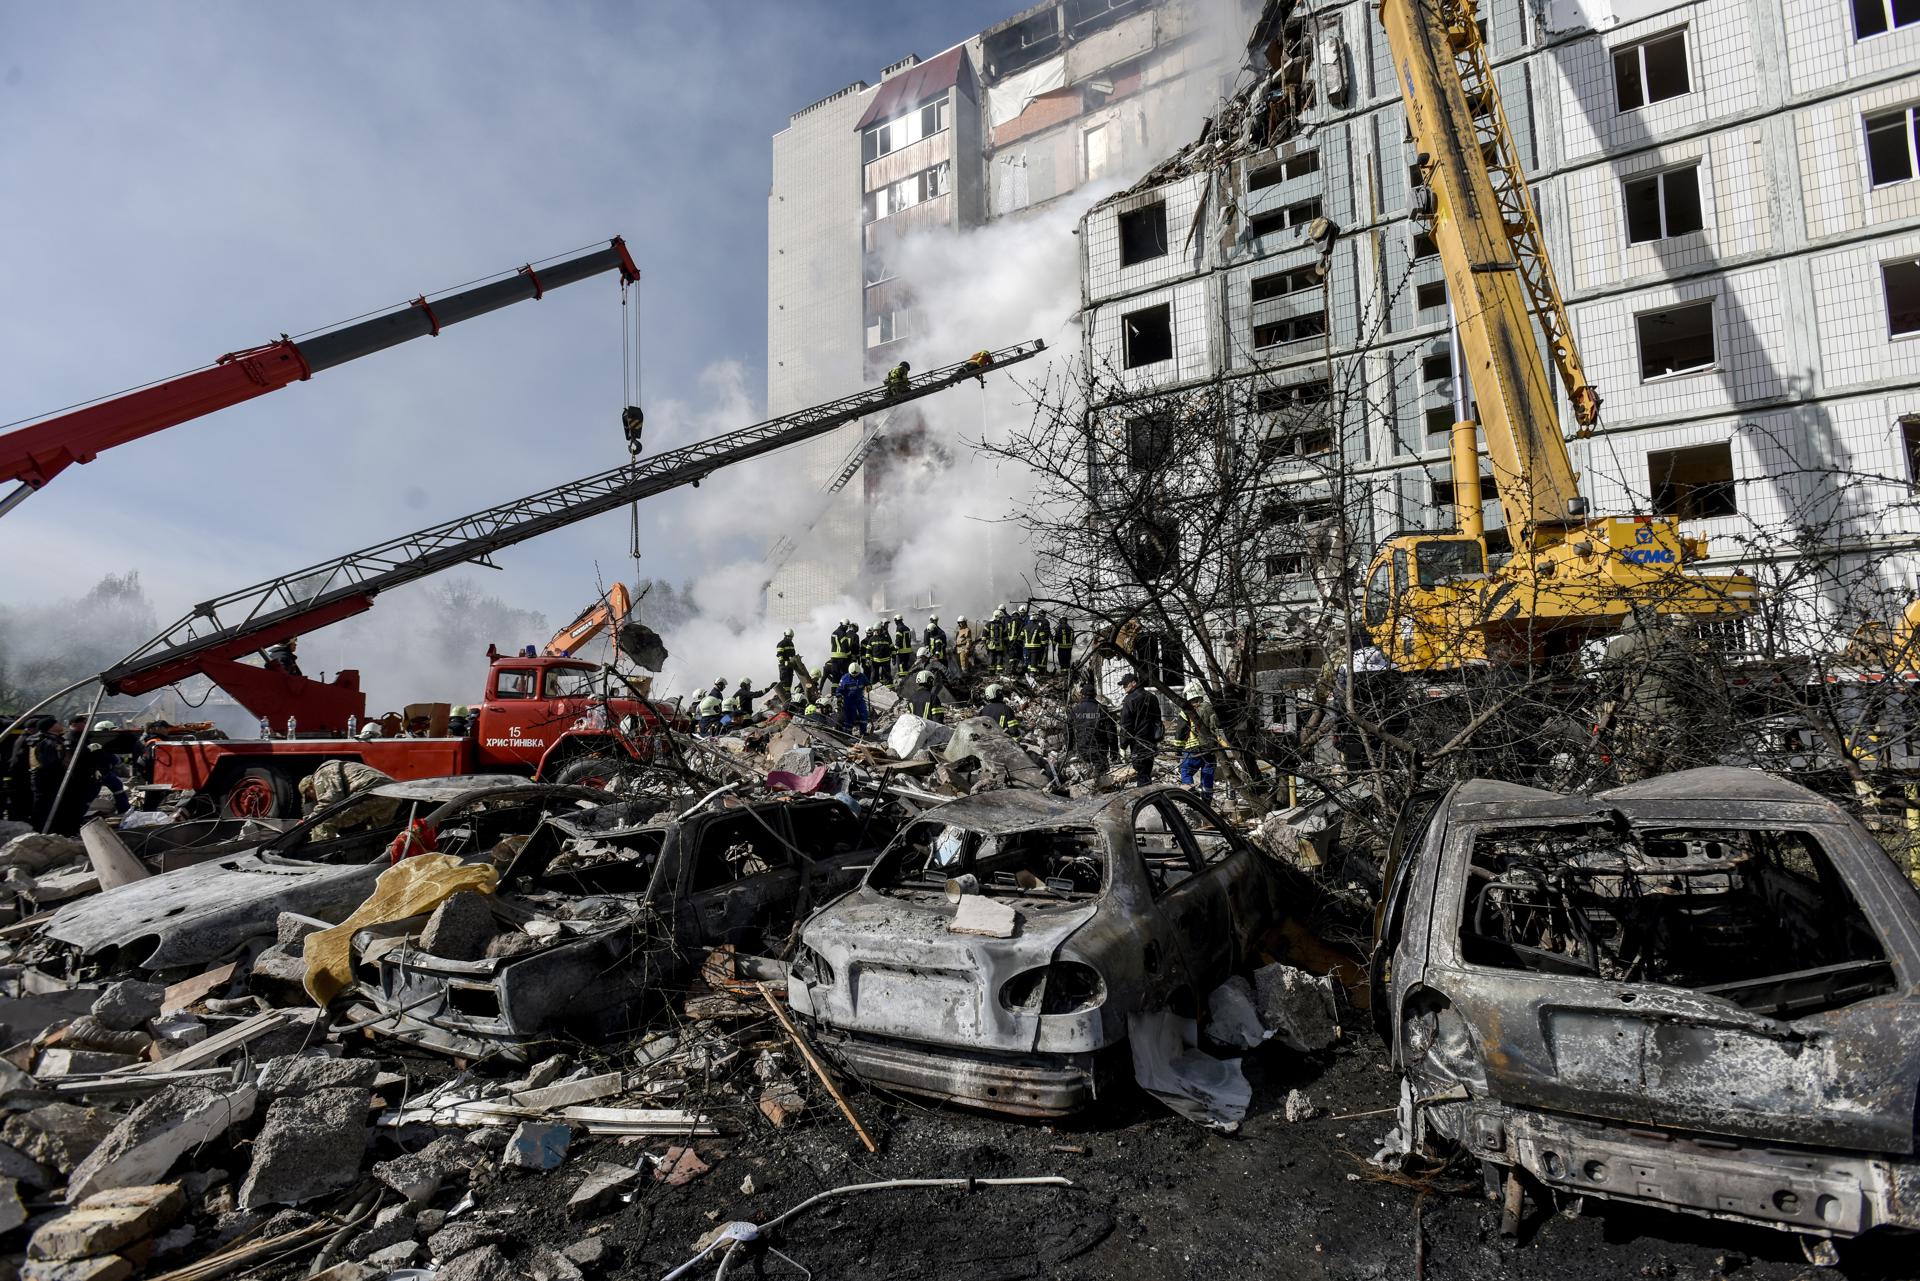 A view of destroyed cars (front) as rescuers work at the site of a damaged residential building after a missile attack, in Uman, Cherkasy region, central Ukraine, 28 April 2023, amid Russia's invasion. EFE/EPA/OLEG PETRASYUK